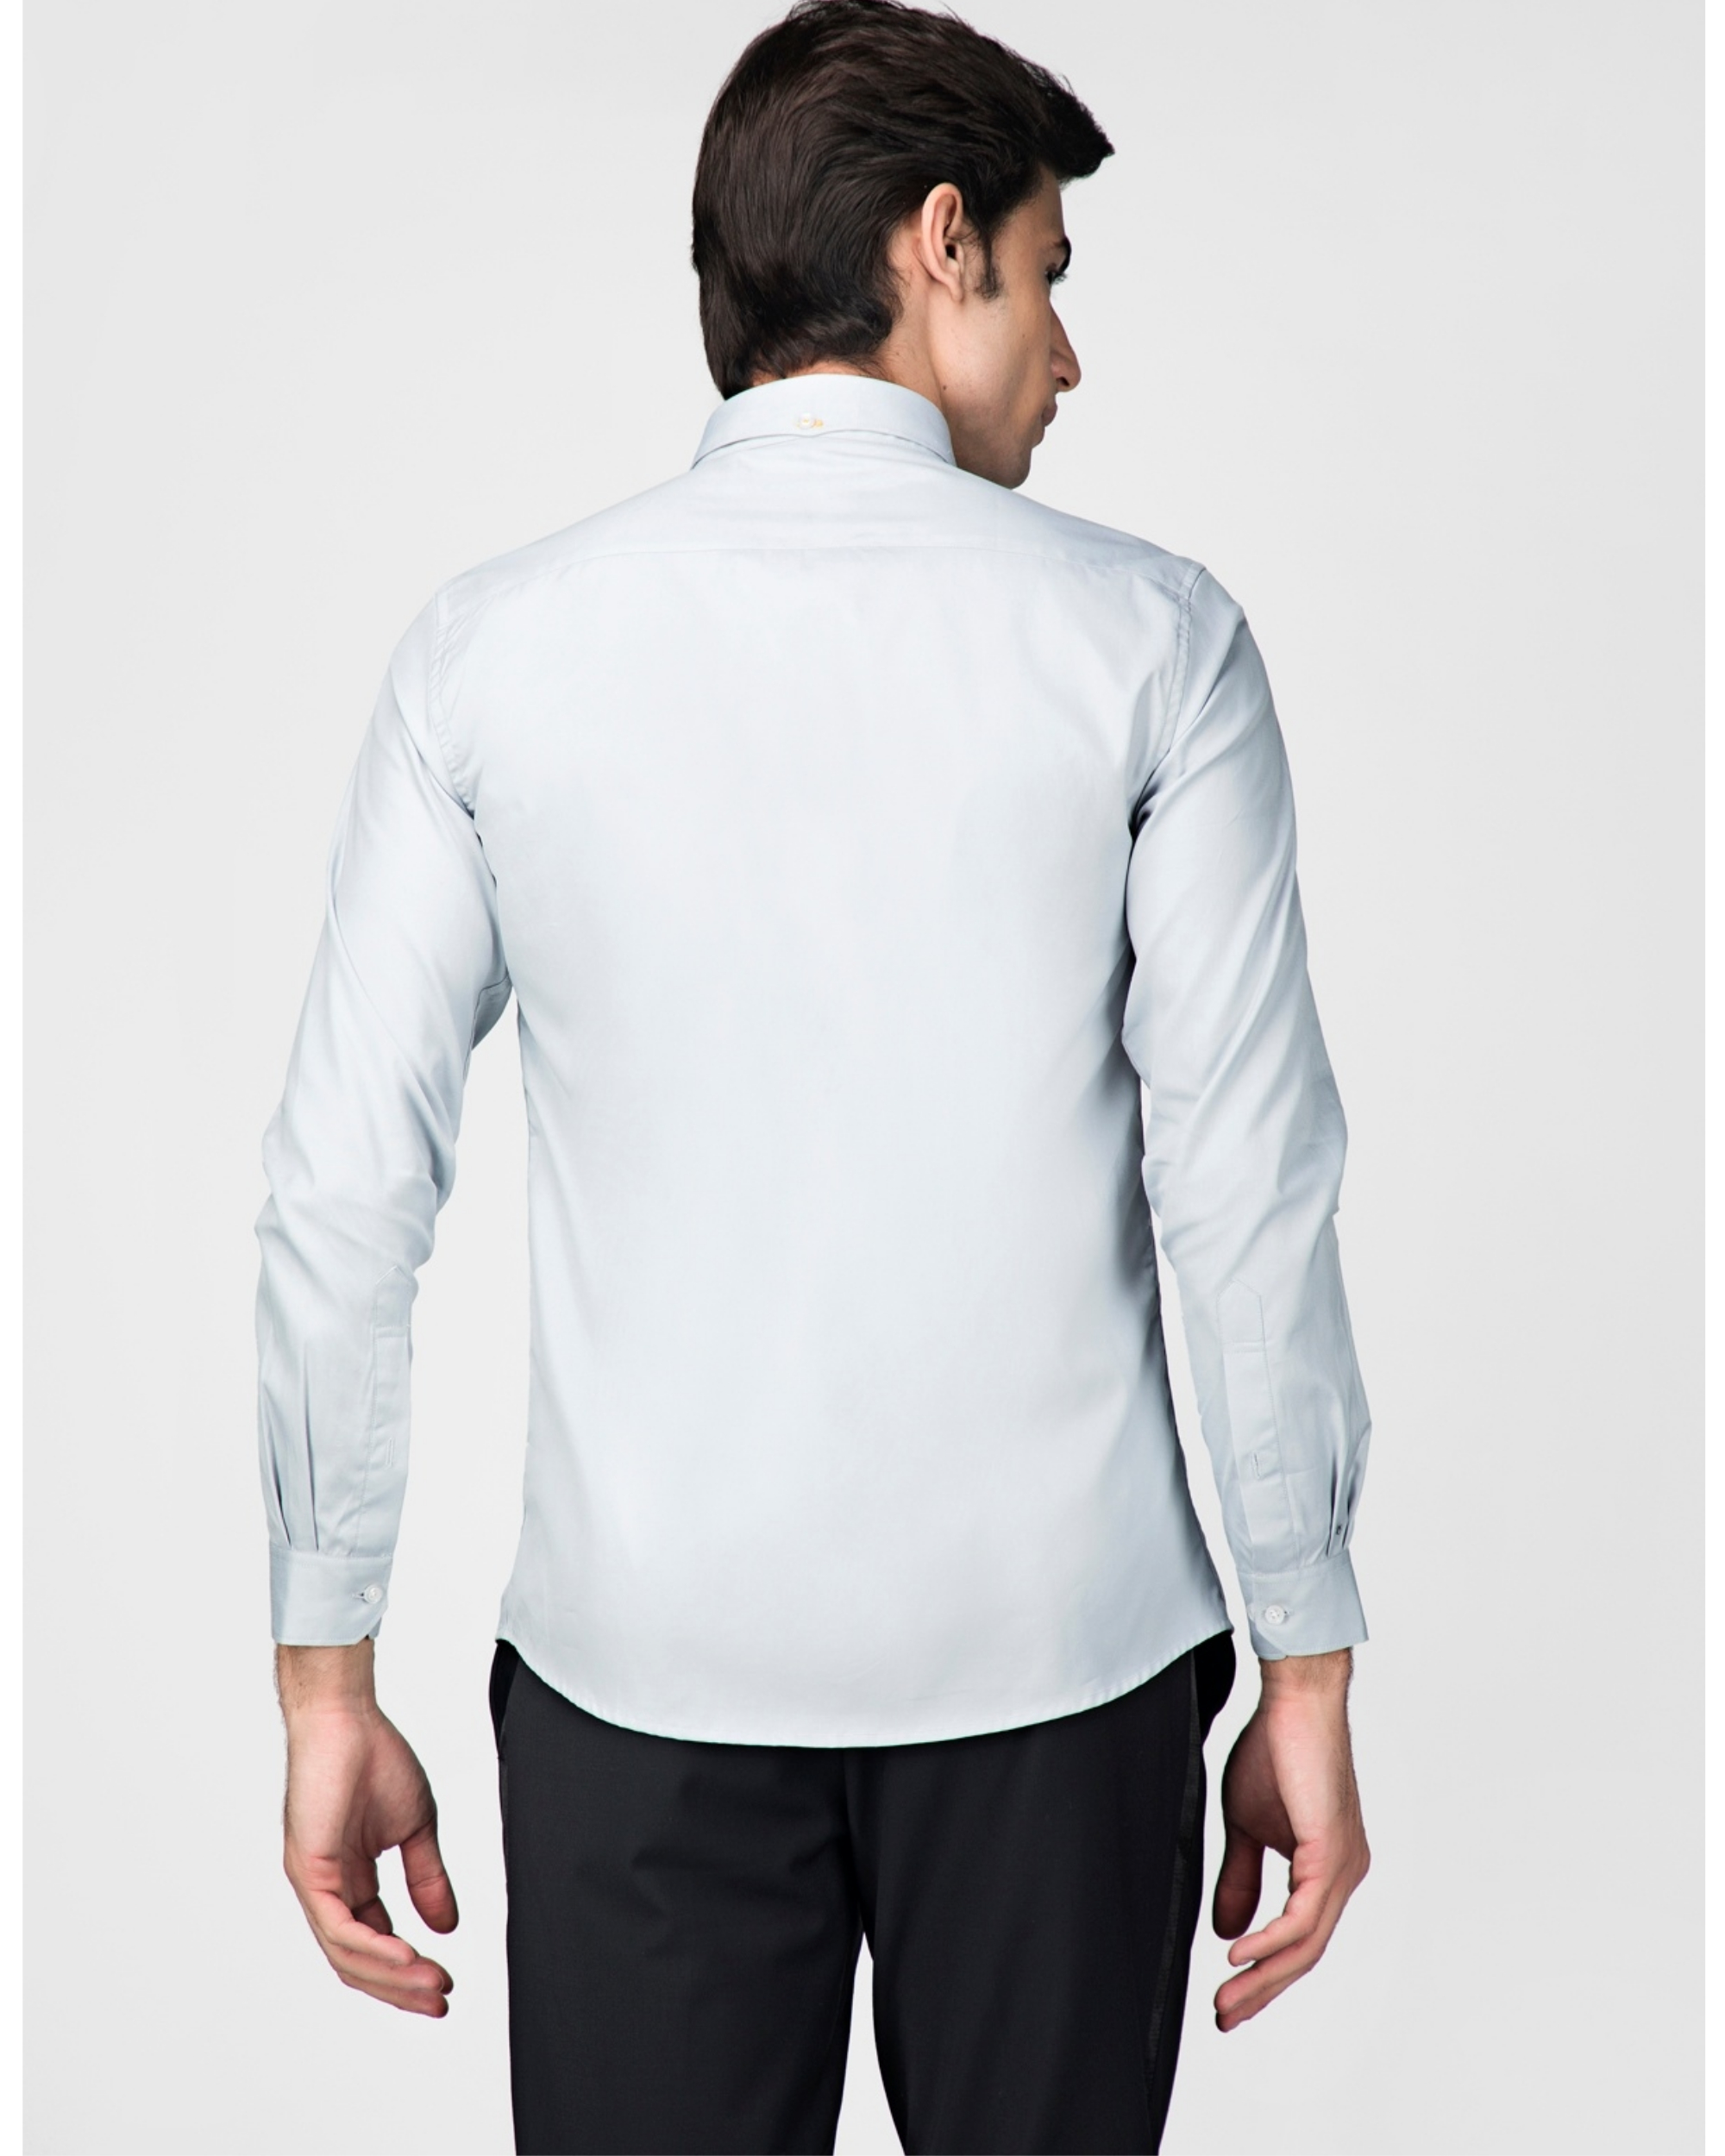 Light grey oxford embroidered shirt by Green Hill | The Secret Label